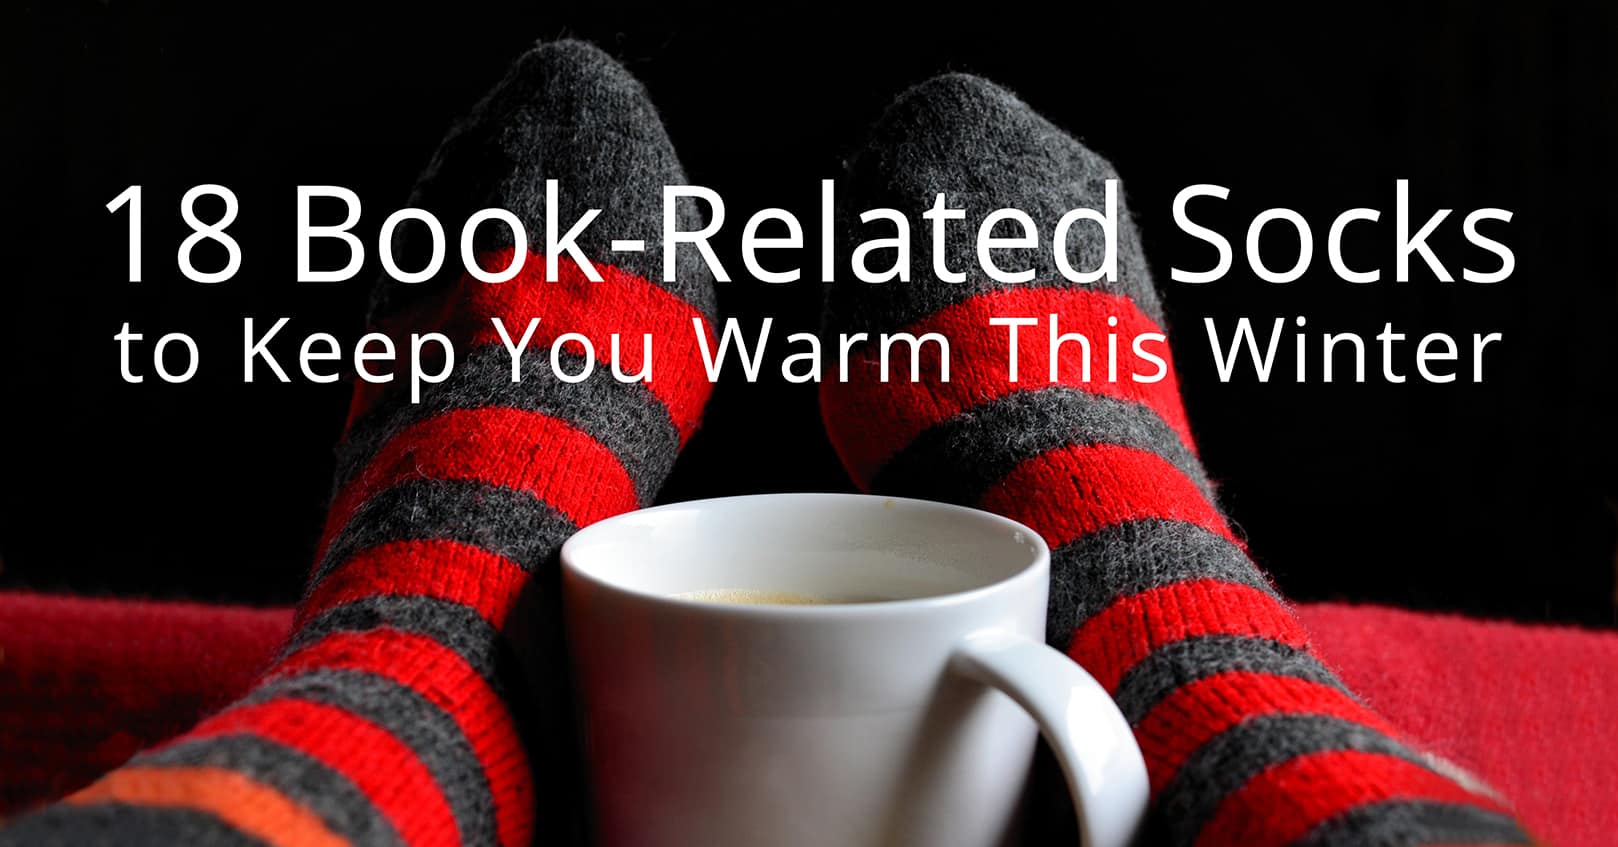 18 Book-Related Socks to Keep You Warm This Winter